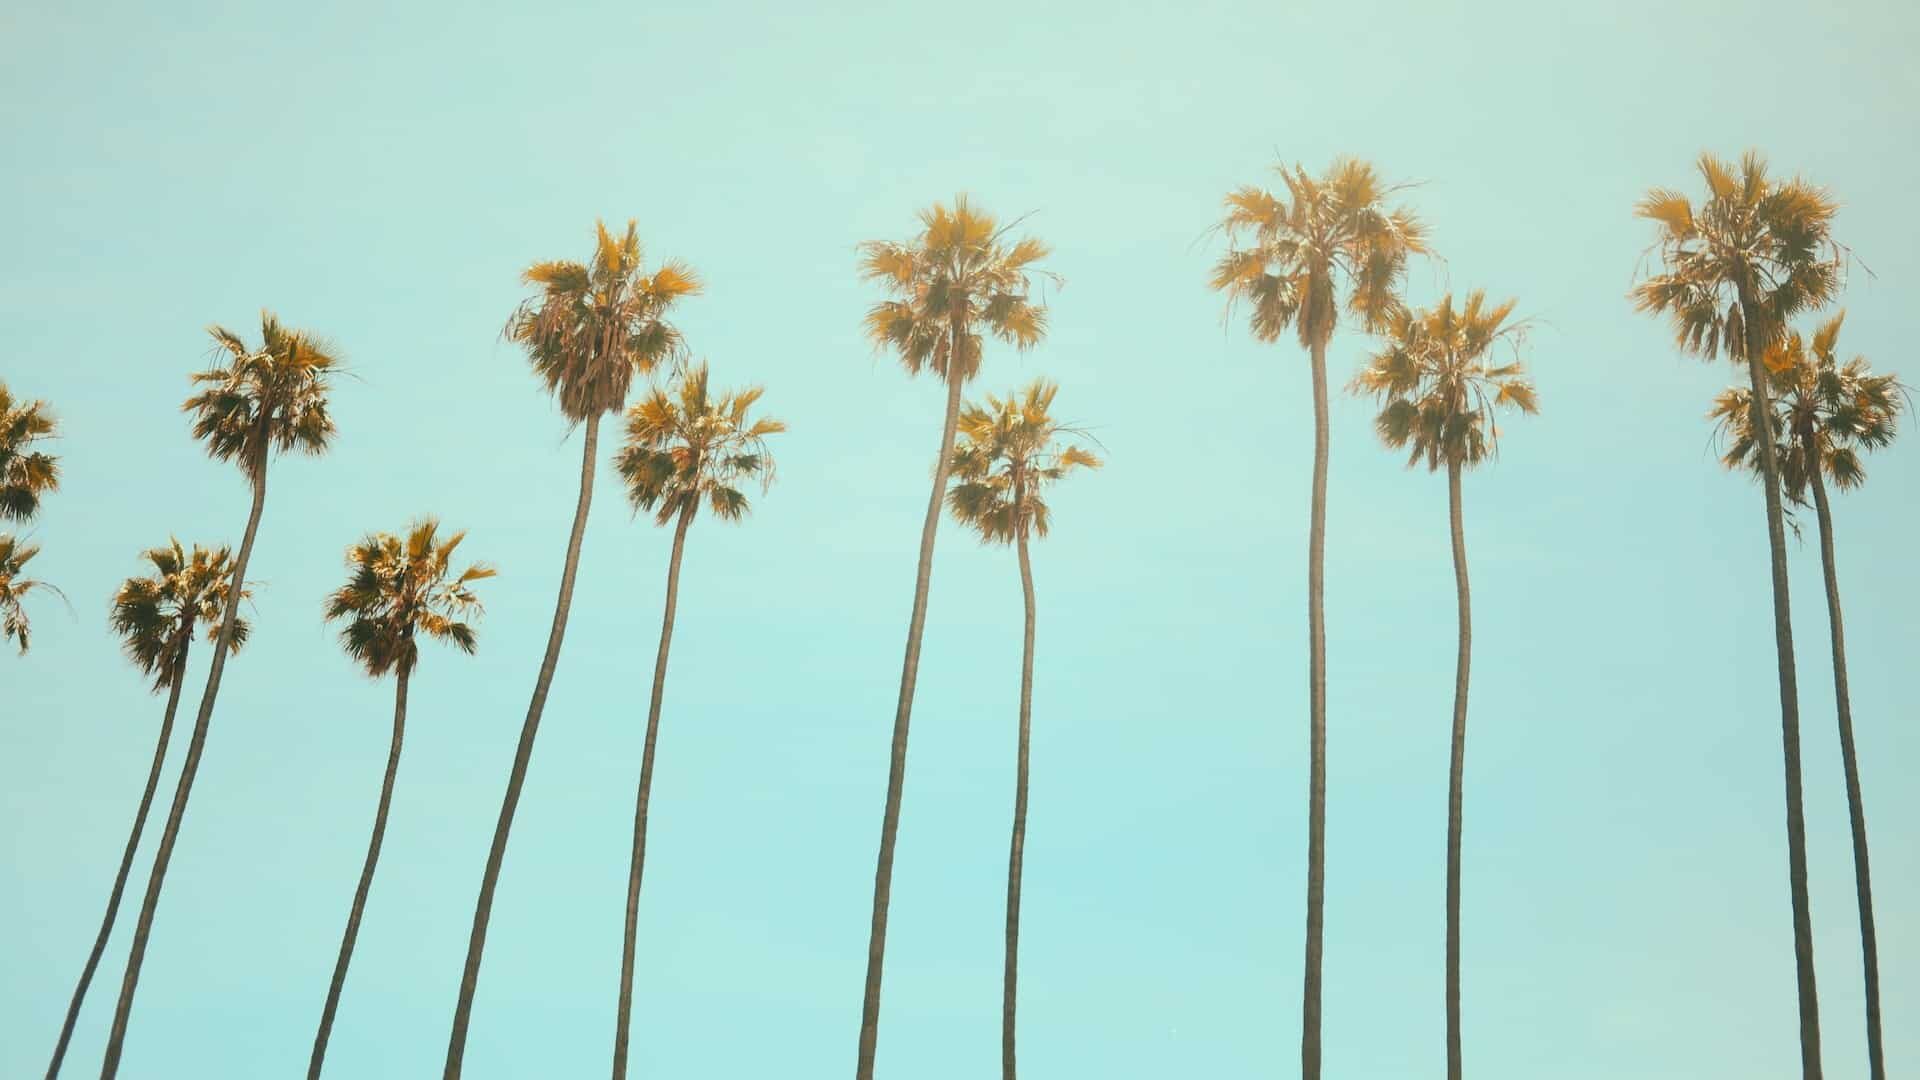 Teal blue sunny skies with tall golden palm trees